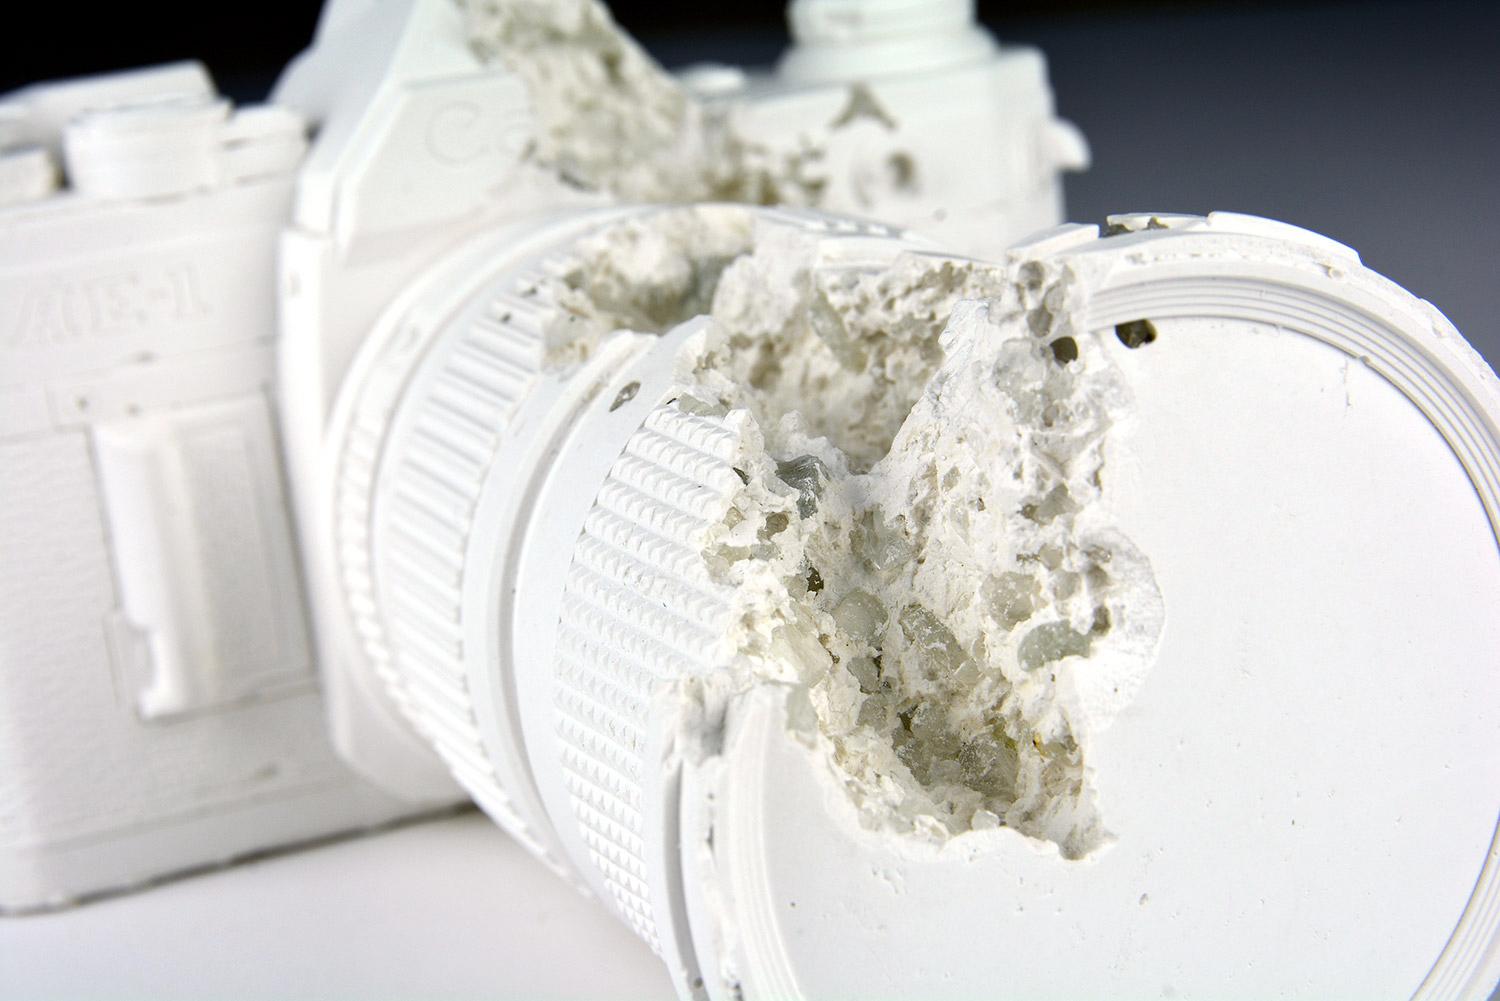 Daniel Arsham - FUTURE RELIC 02 - CANON AE1

Date of creation: 2014
Medium: Plaster and crushed glass
Edition number: 074/450
Size: 14.6 × 15.9 × 9.5 cm
Condition: In mint conditions, inside its original package. Never displayed, the box has only